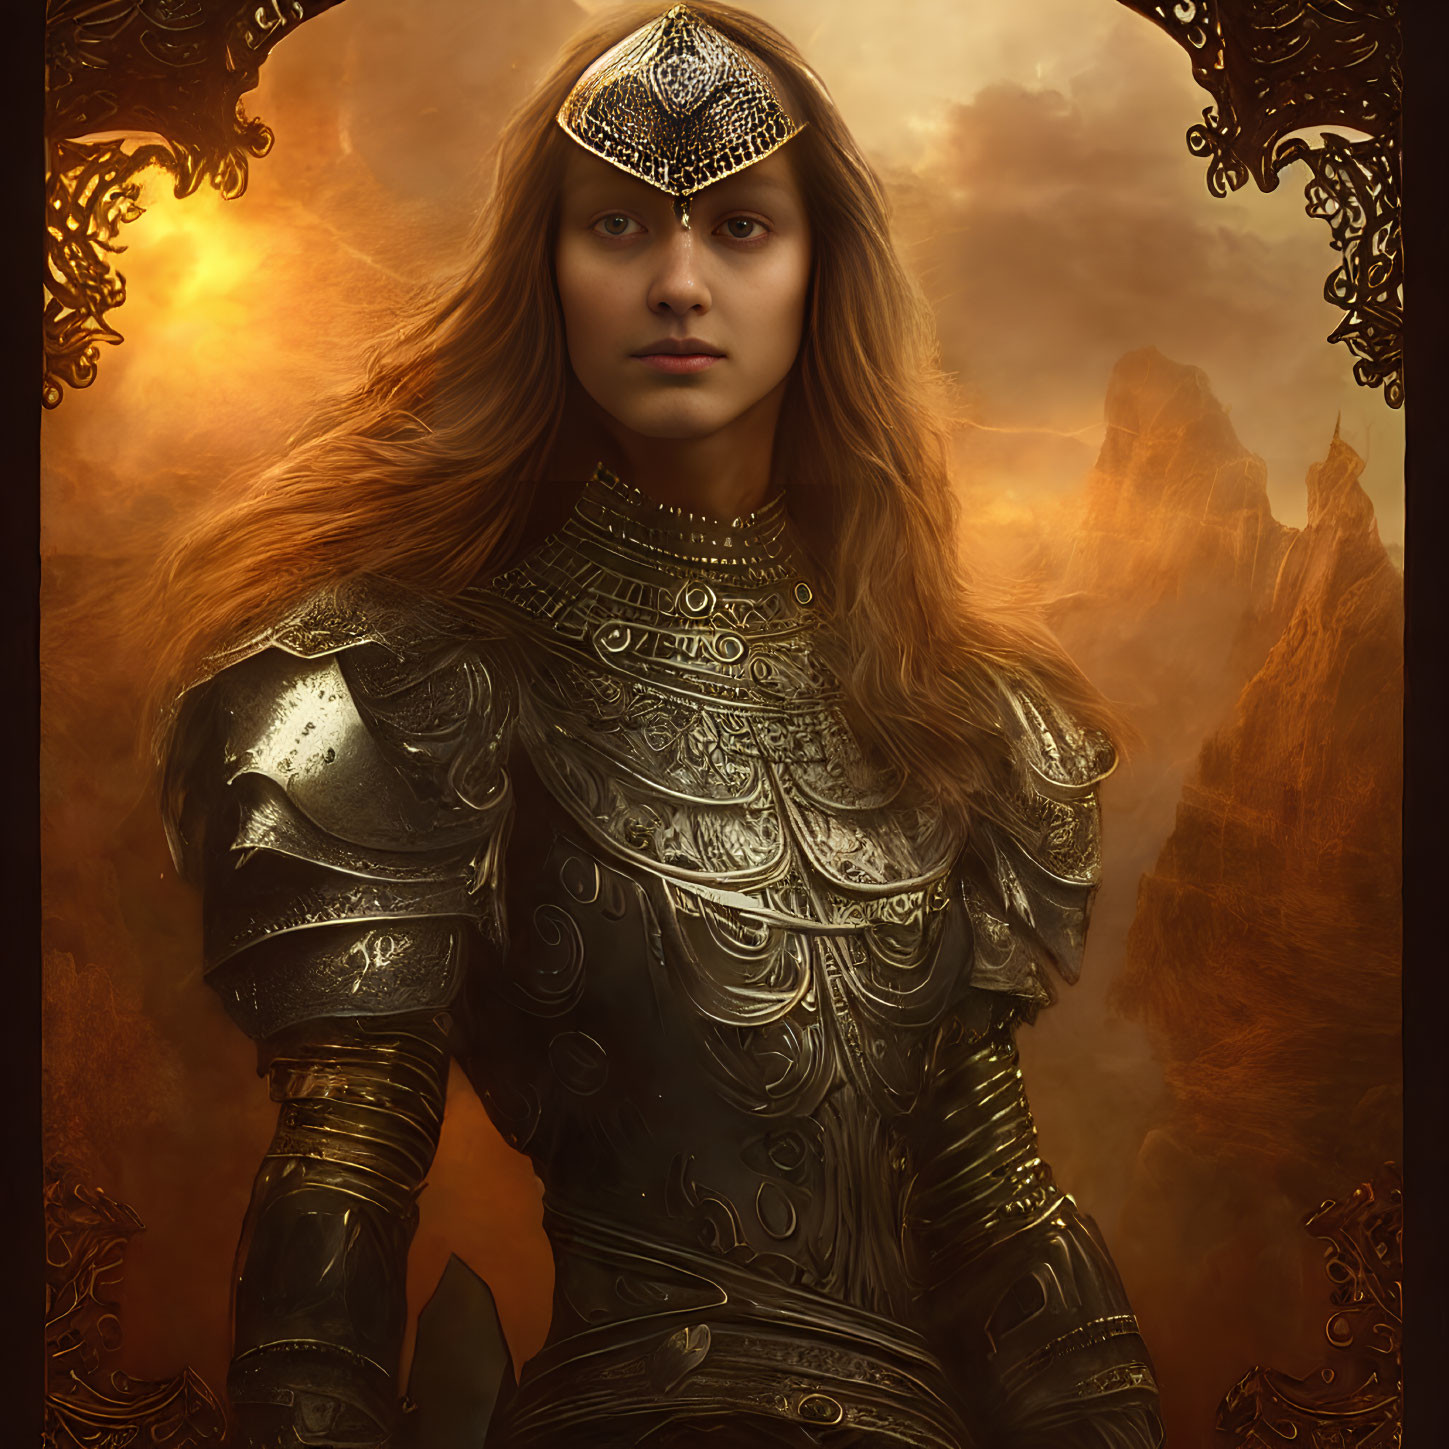 Regal warrior woman in ornate armor with jeweled headpiece in fantasy landscape.